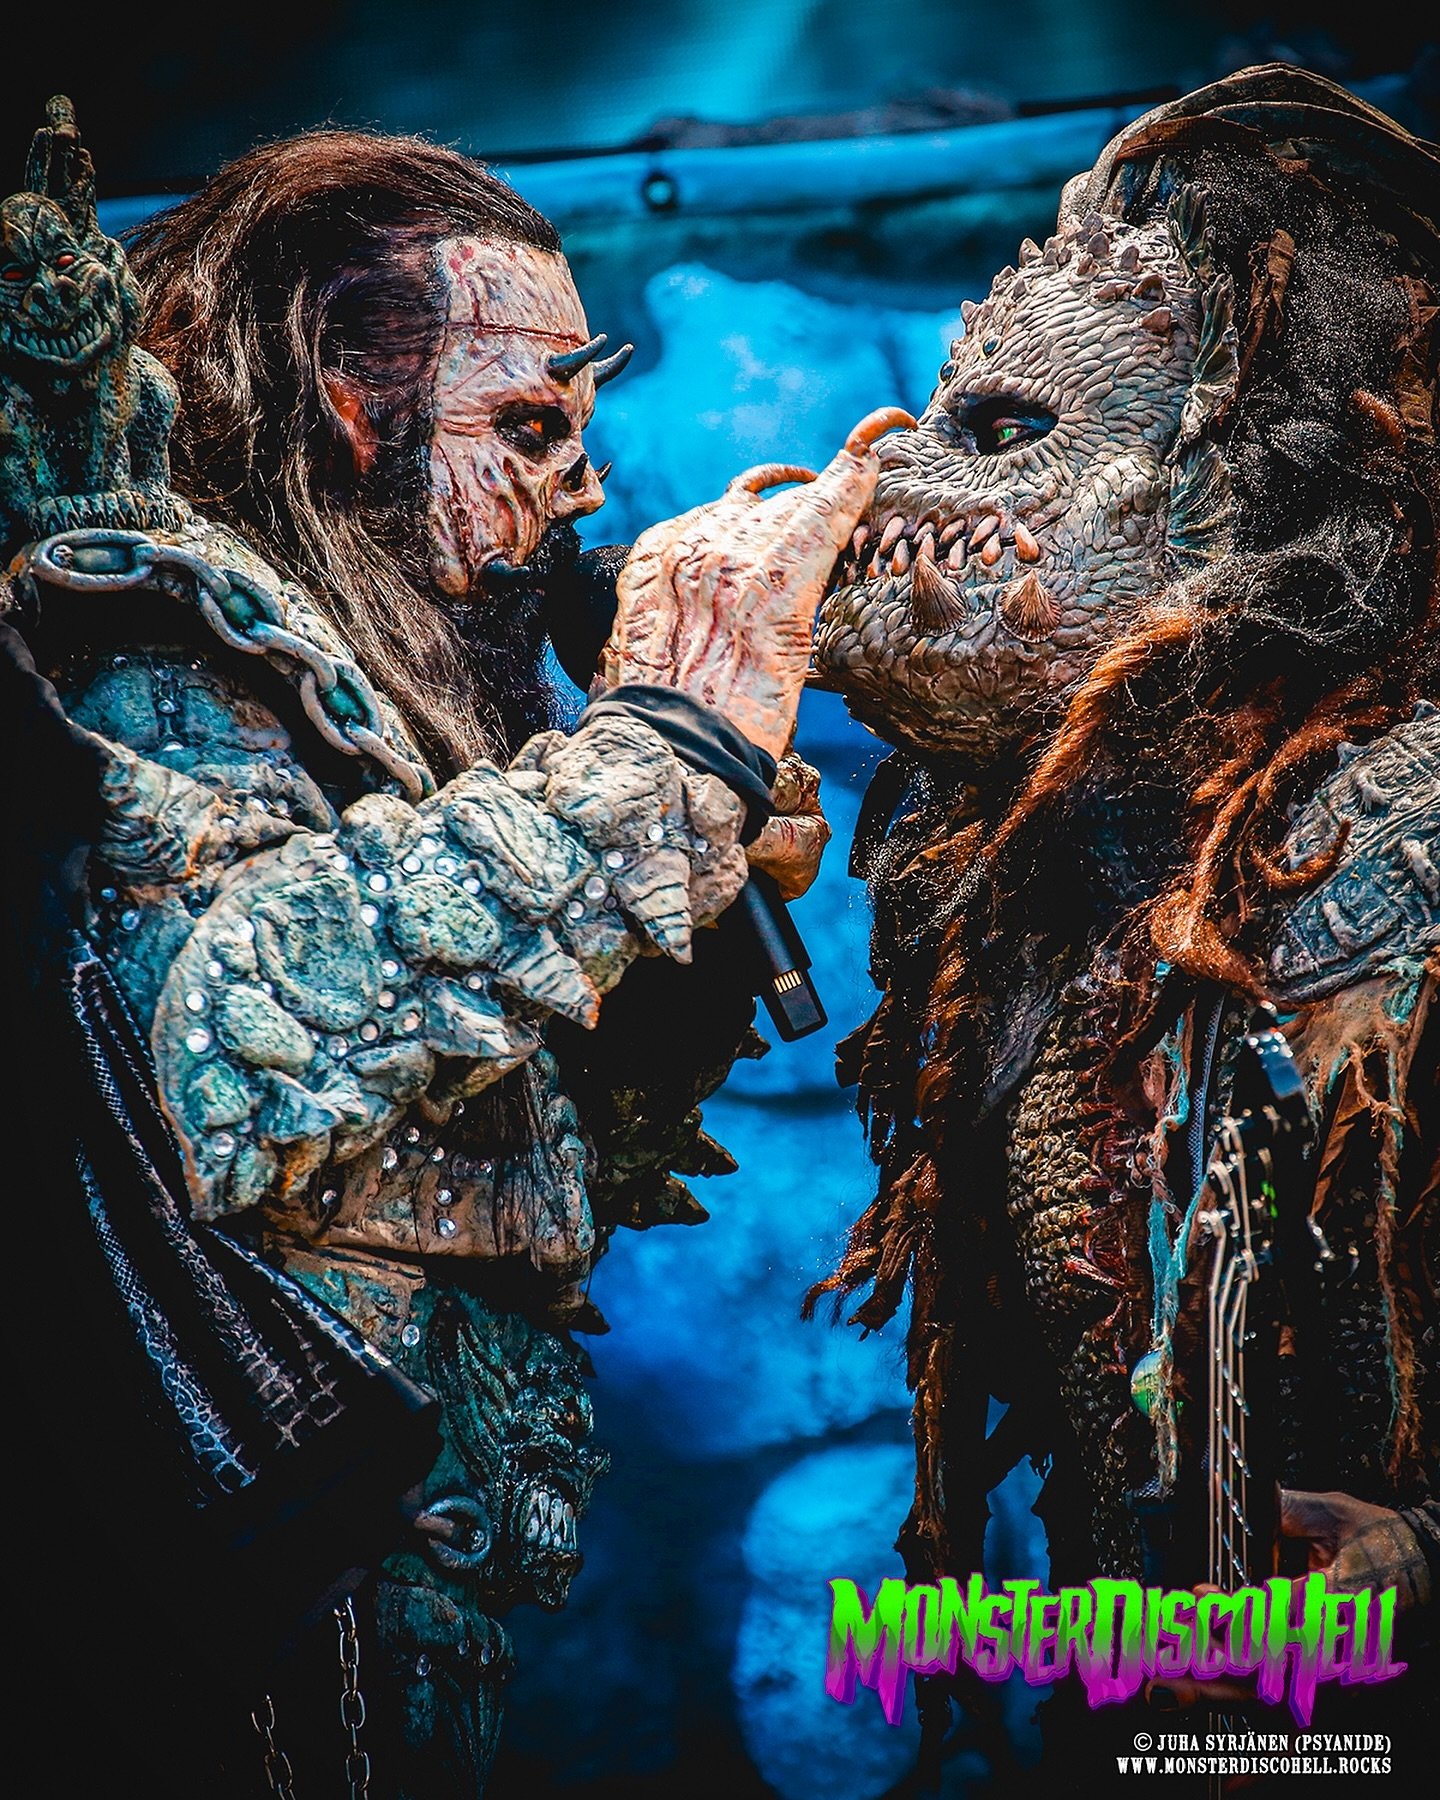 Everyone who&rsquo;s seen the band perform Thing In The Cage live, knows exactly what&rsquo;s happening in this picture! Mr. Lordi offering some finger food snacks to Hiisi in this previously unused shot from Rockfest, Hyvink&auml;&auml; on June 13th